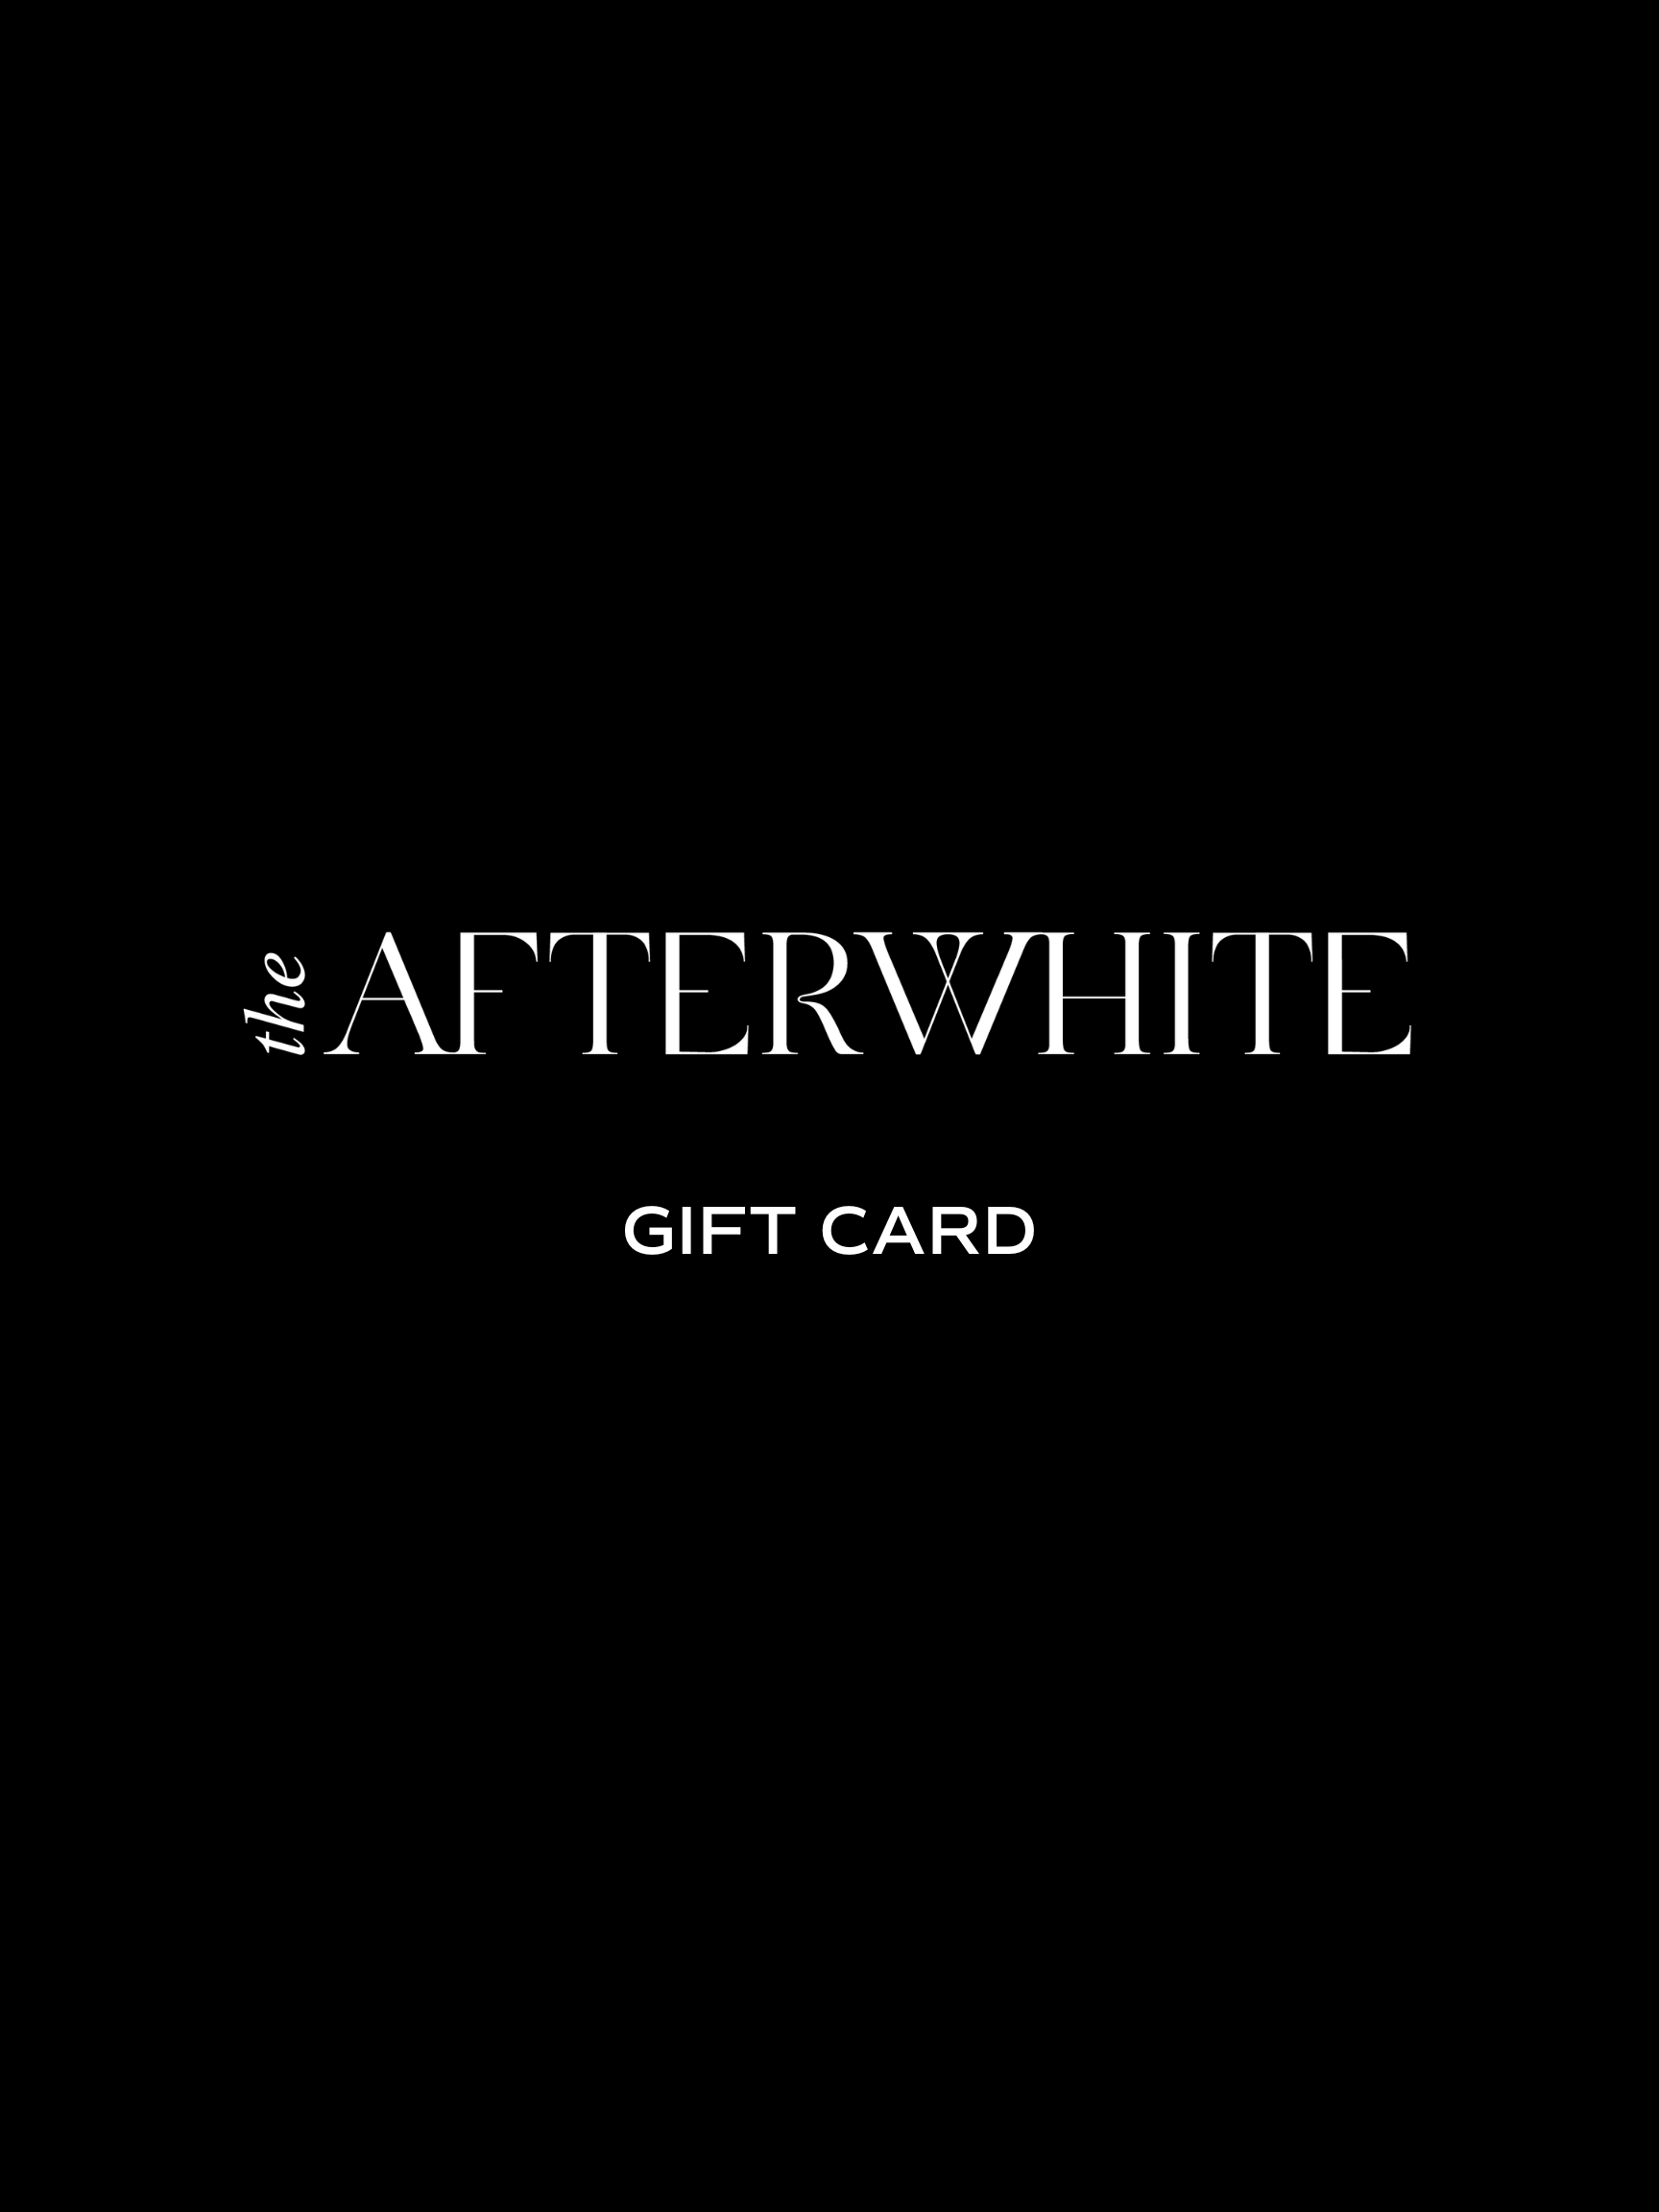 THE AFTERWHITE Gift Card